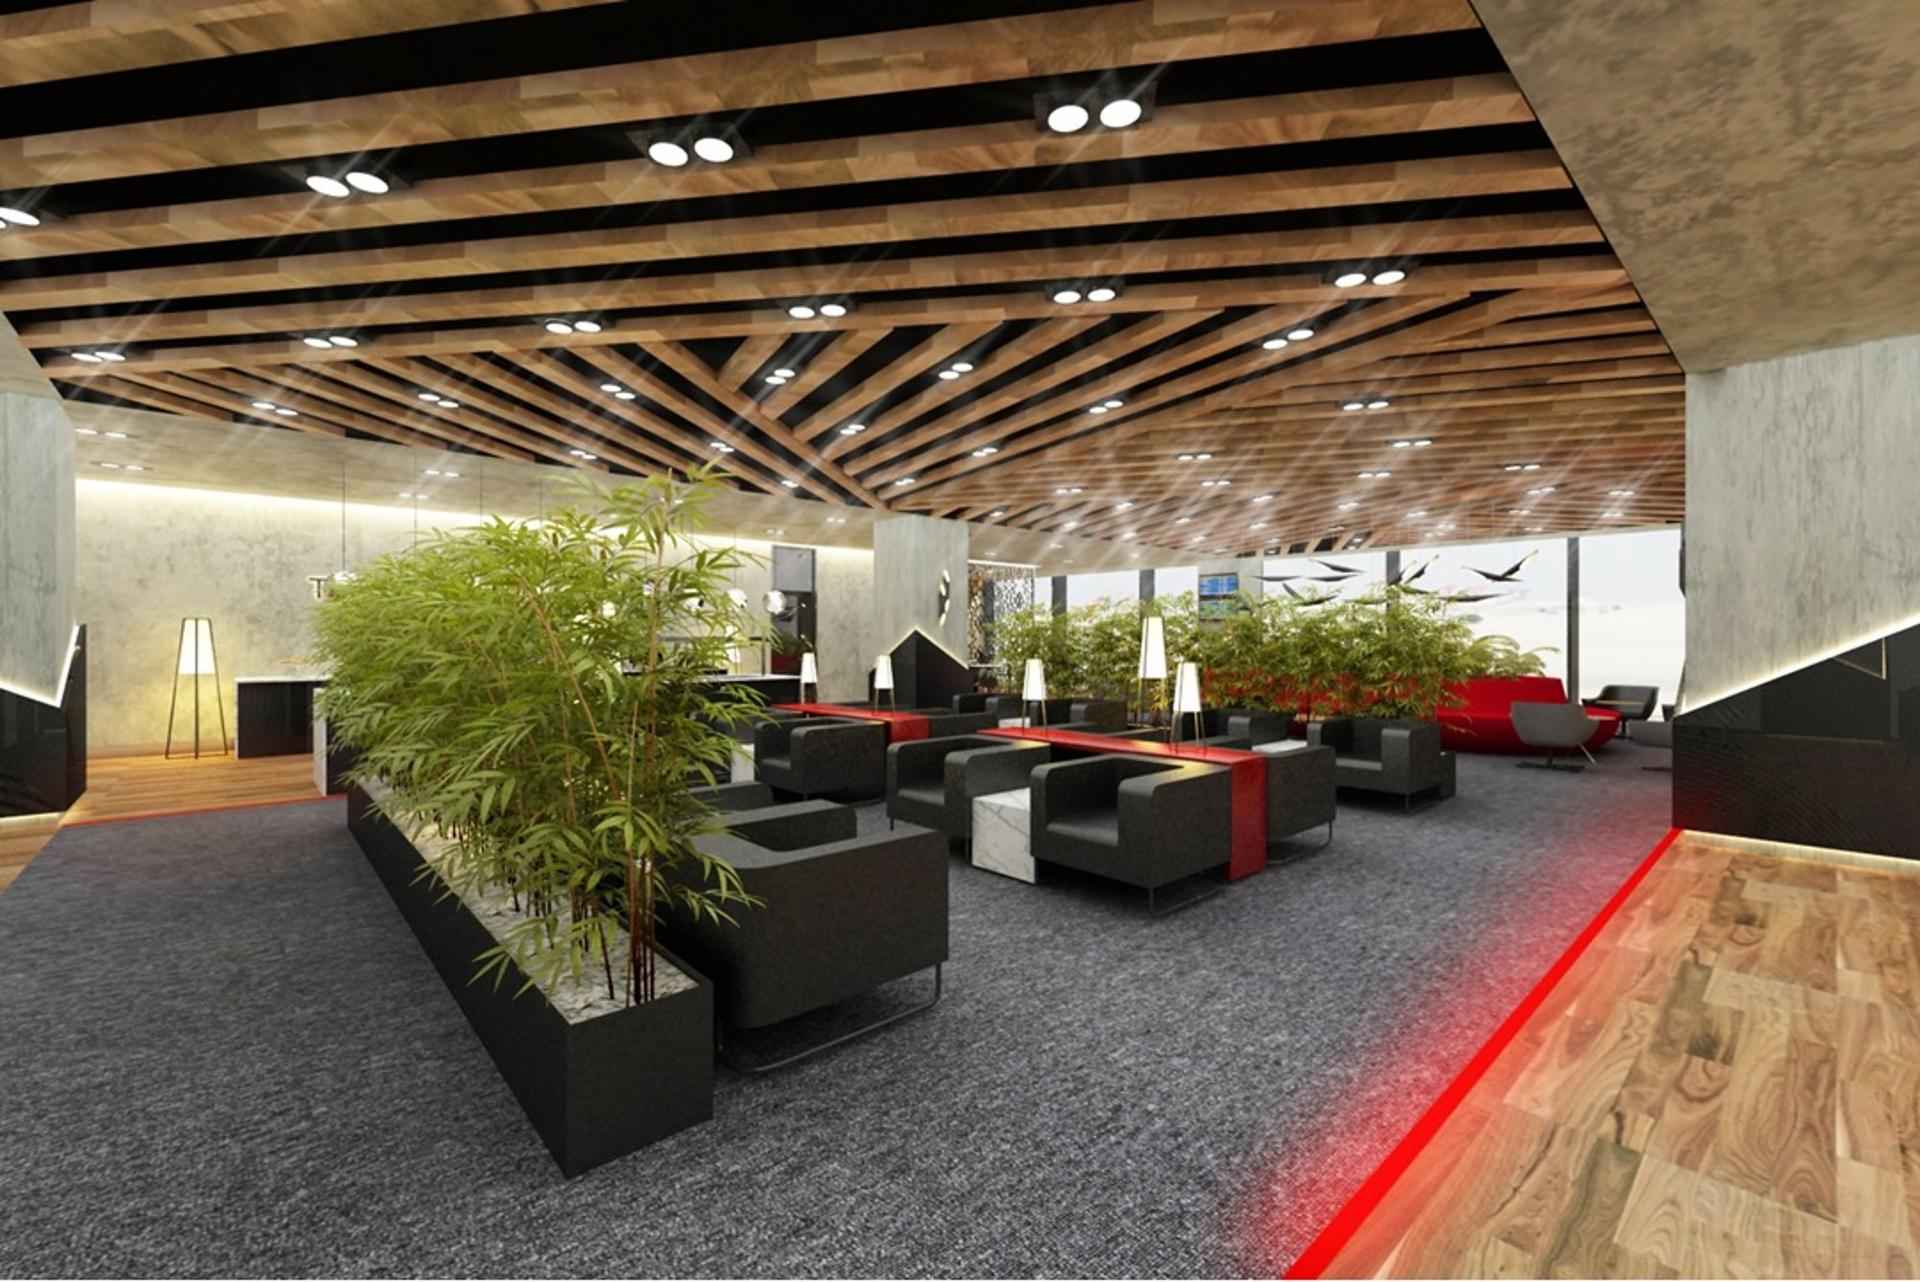 Turkish Airlines CIP Lounge (Business Lounge) image 27 of 27